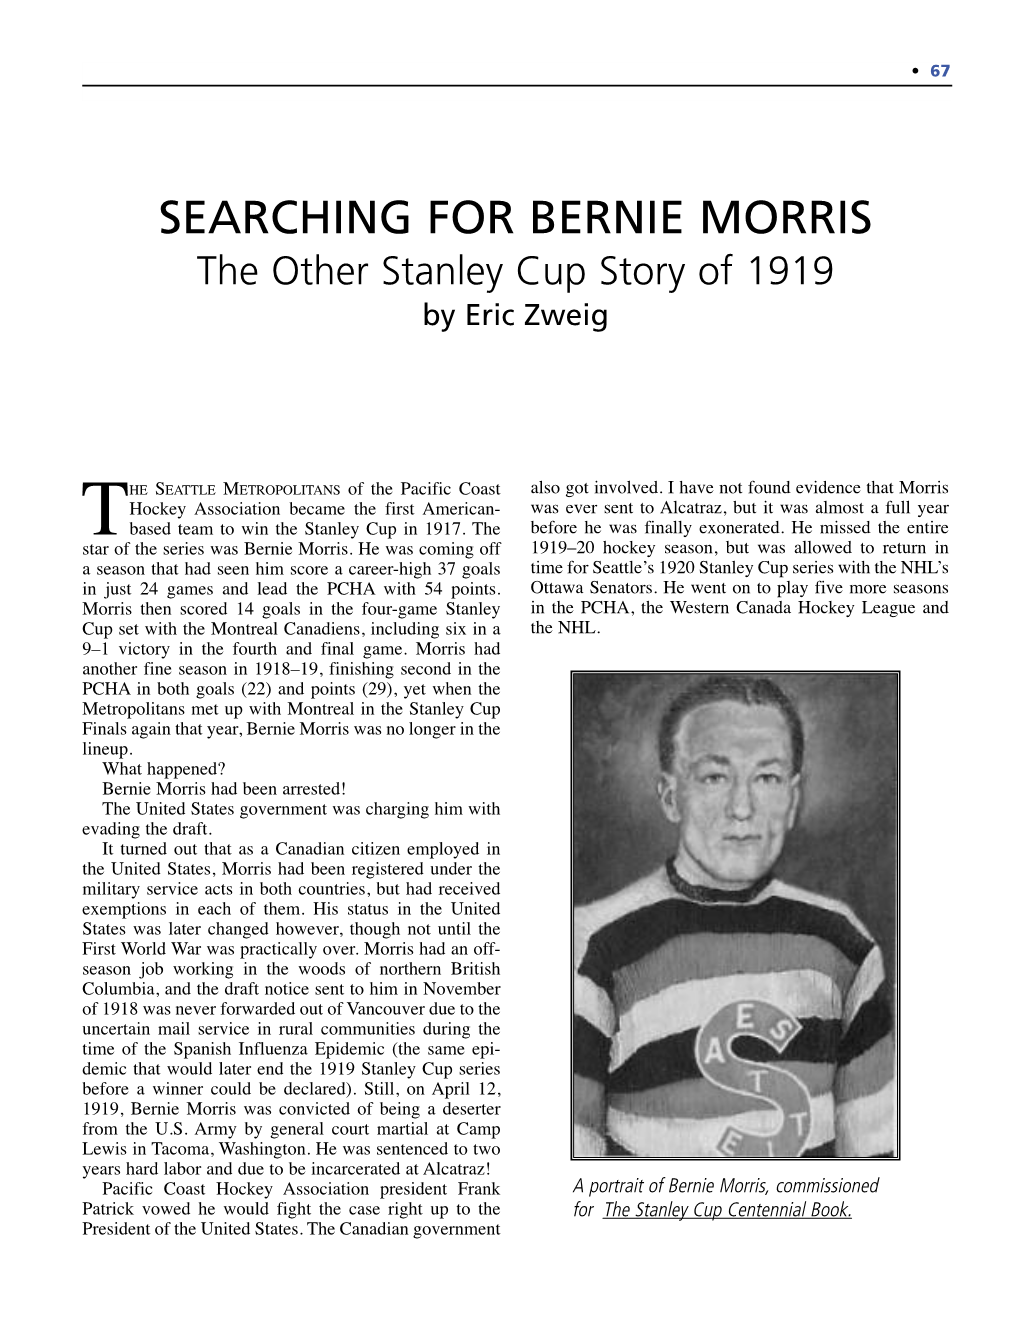 SEARCHING for BERNIE MORRIS the Other Stanley Cup Story of 1919 by Eric Zweig